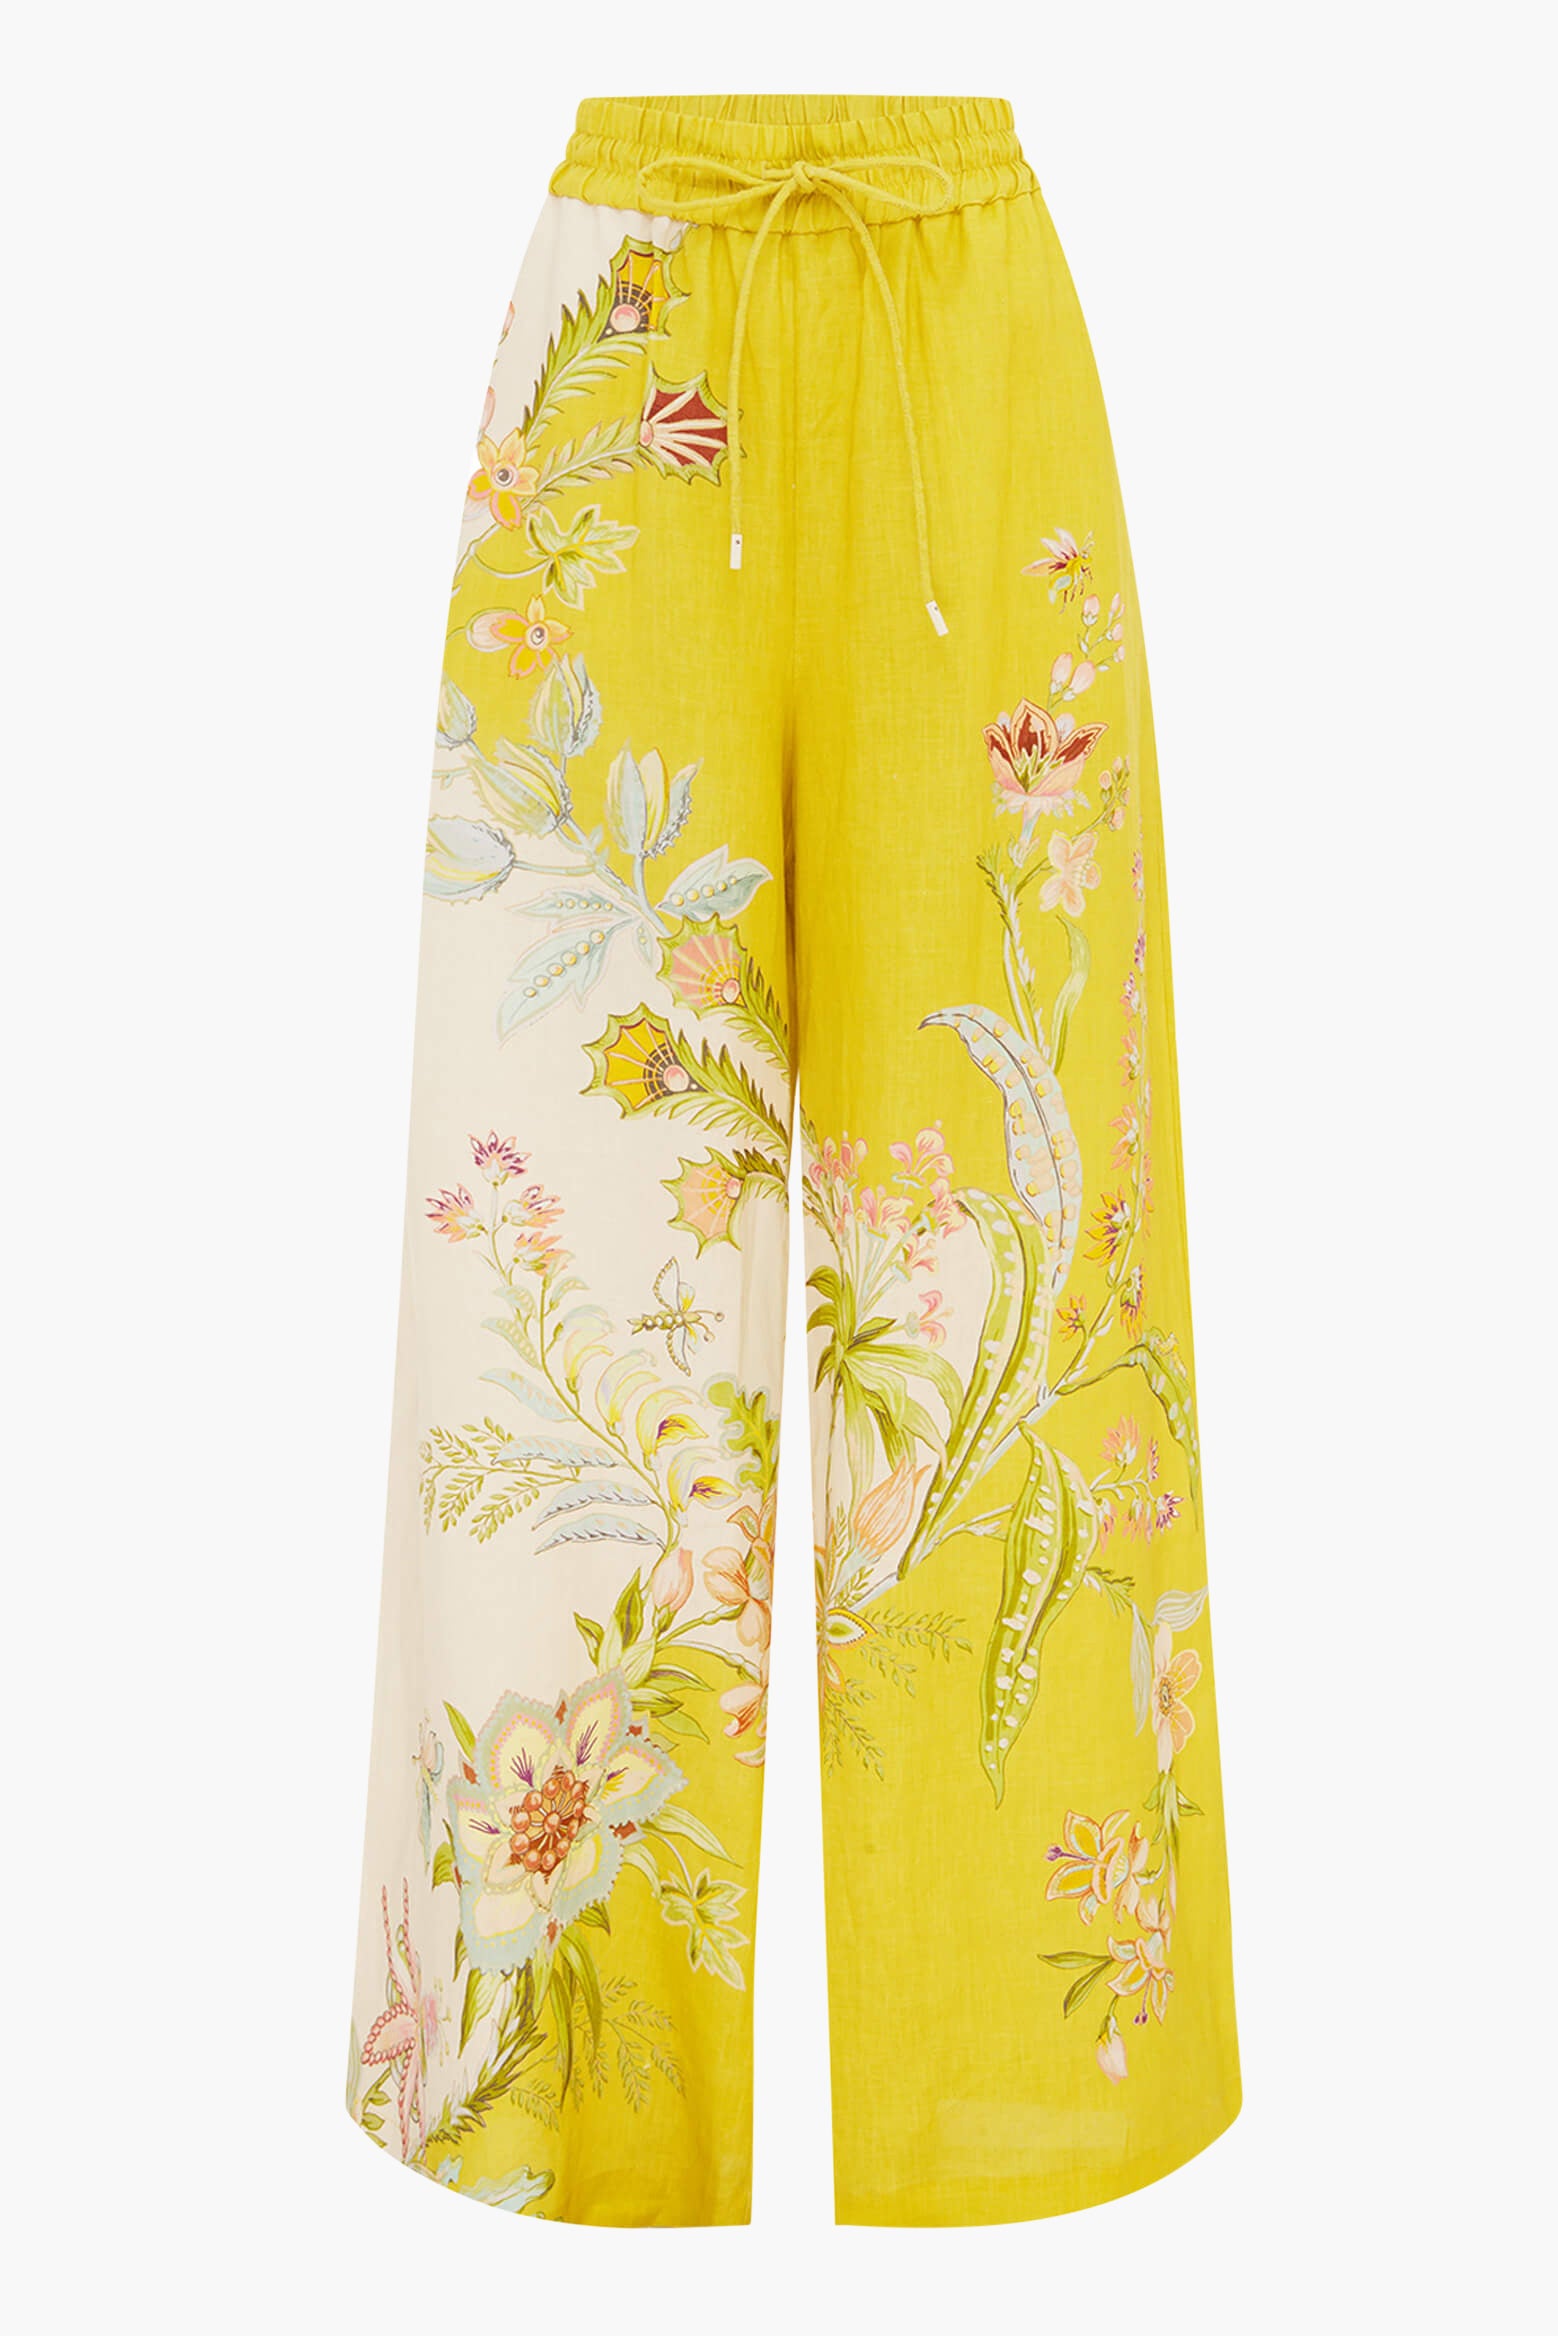 IRA Pant in Lemon/Cream by Alémais from The New Trend